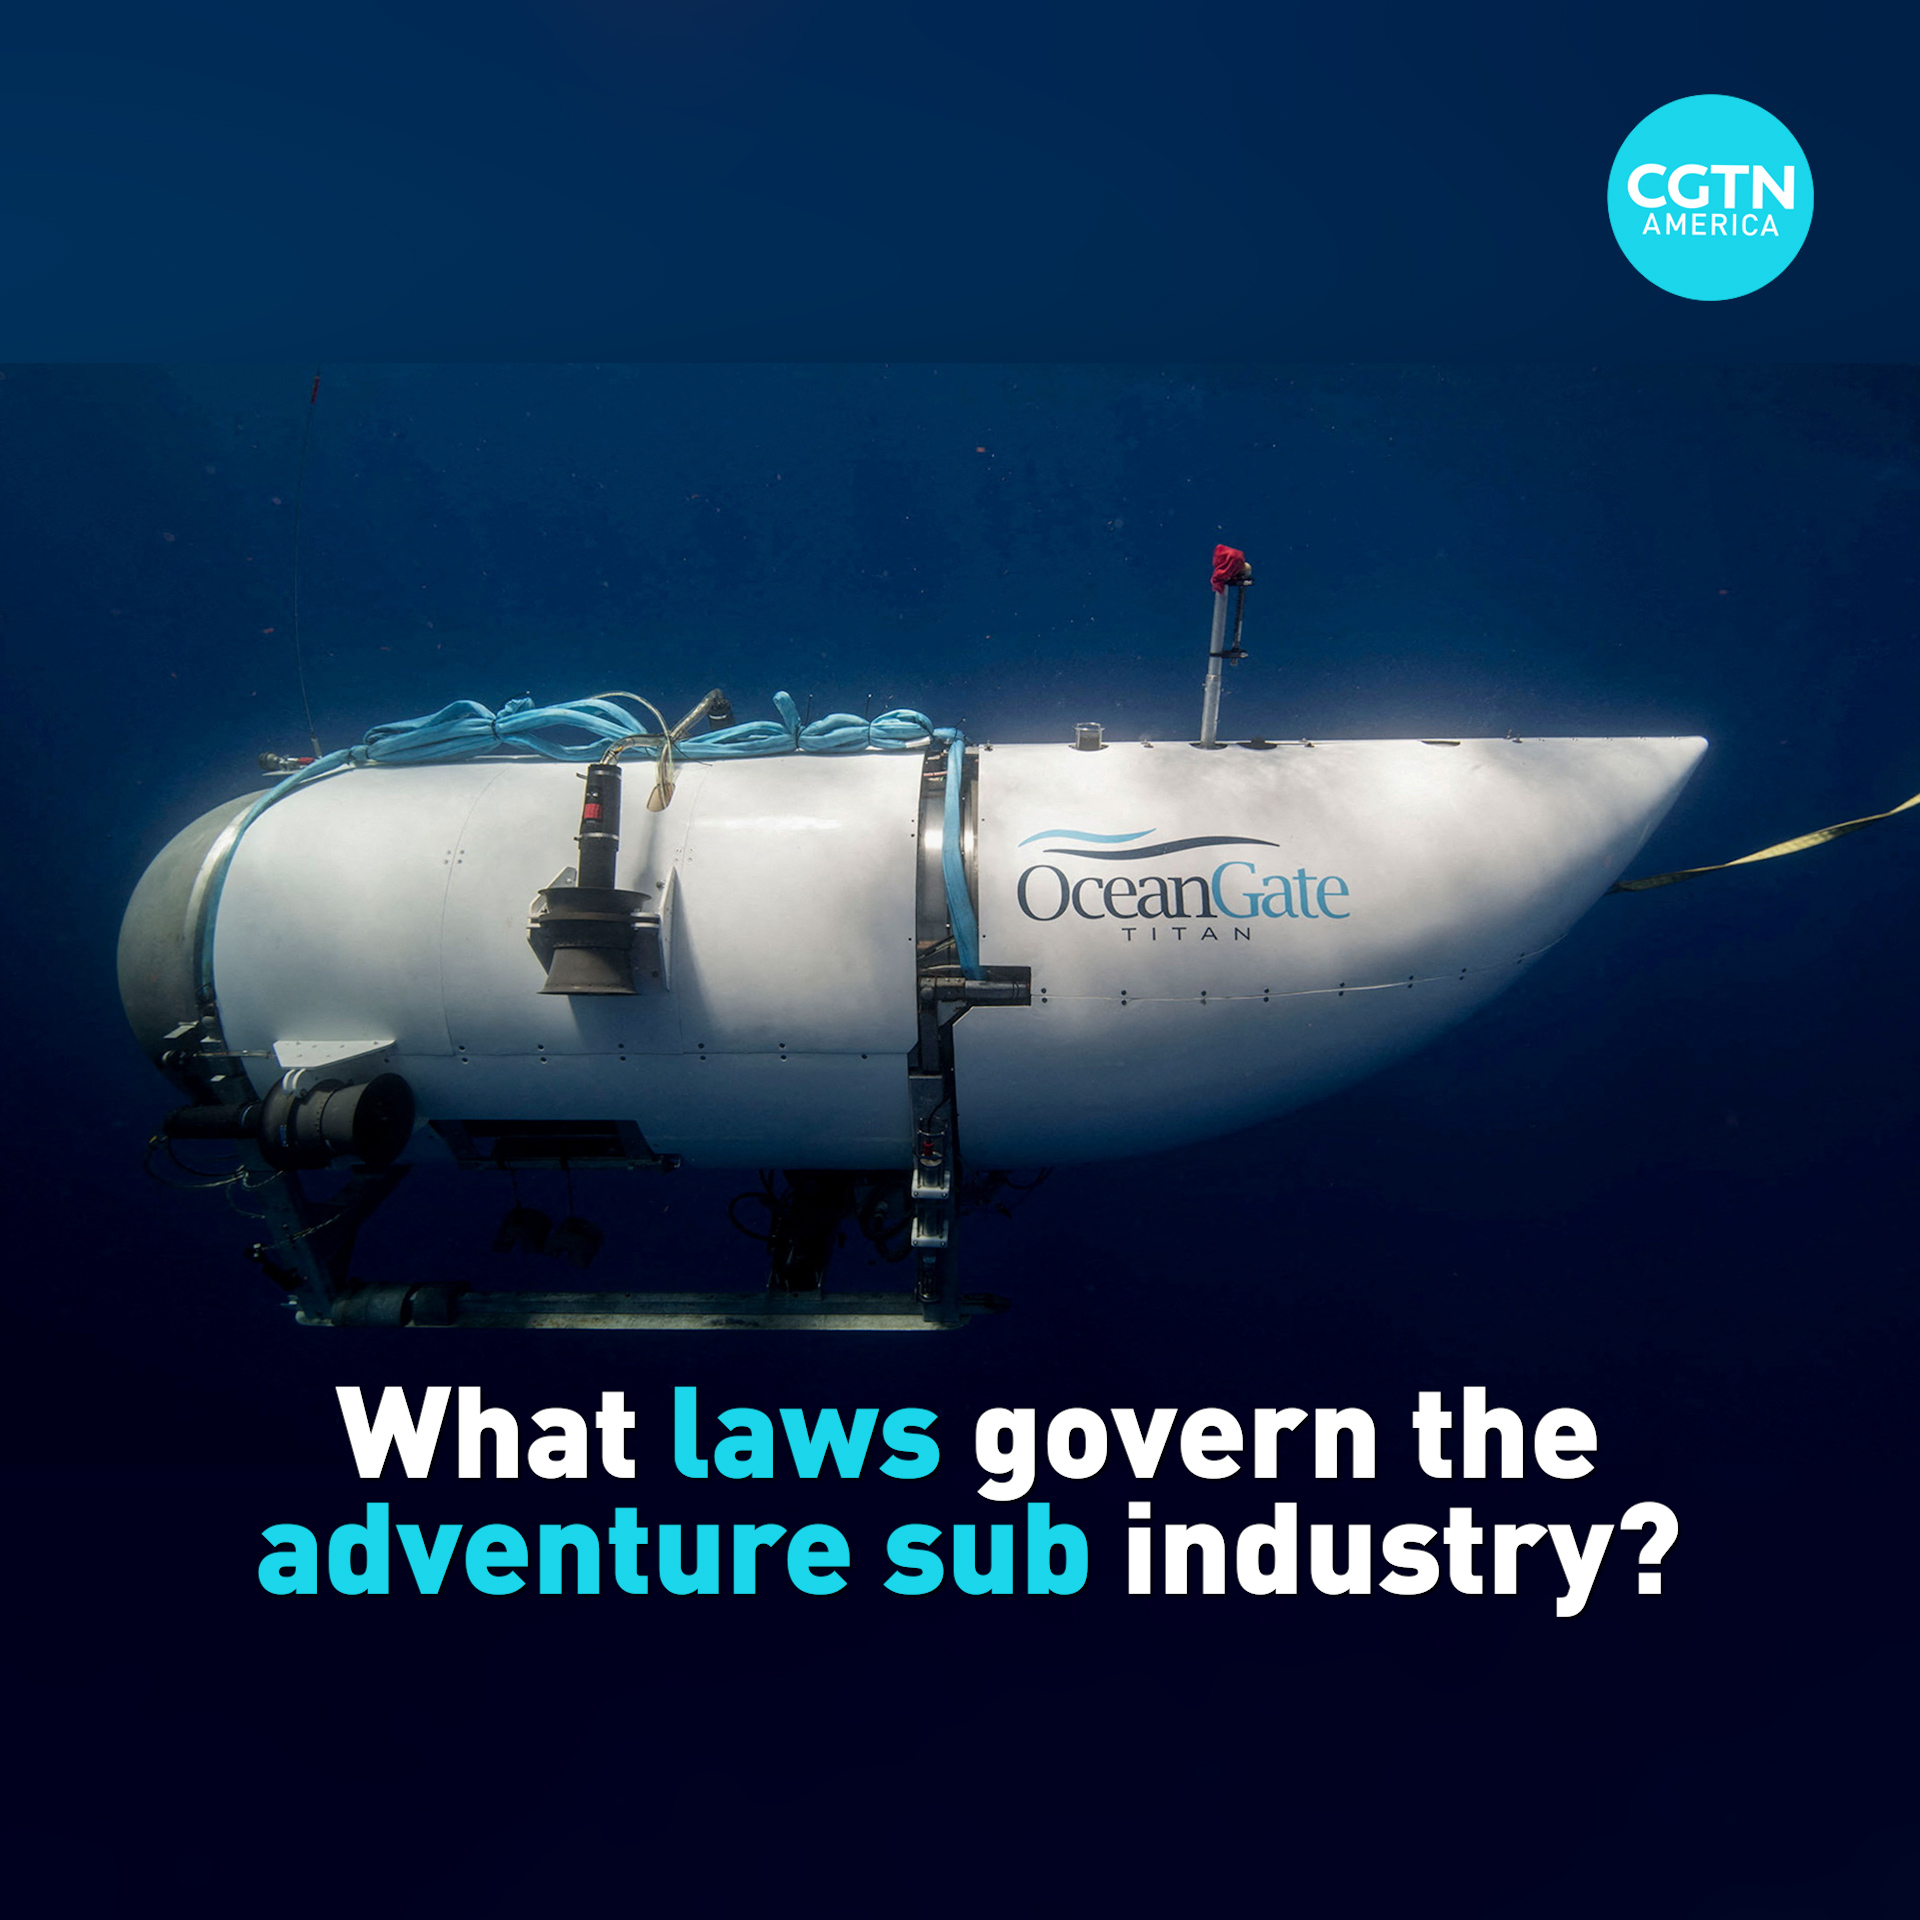 What laws govern the adventure sub industry?